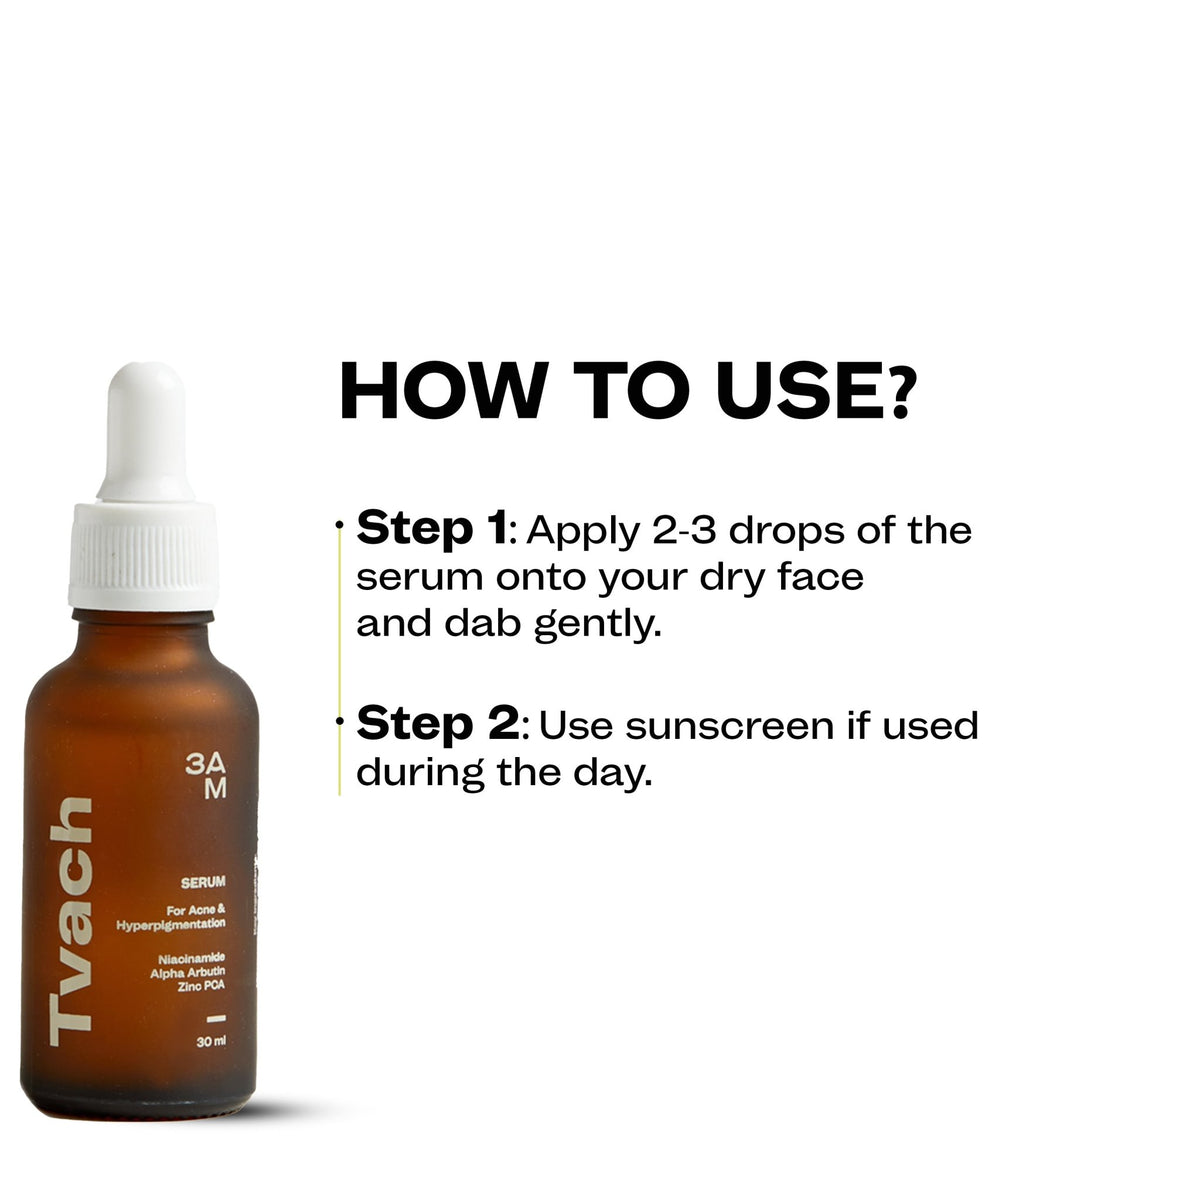 Anti-Acne Face Serum with Niacinamide - 3AM India